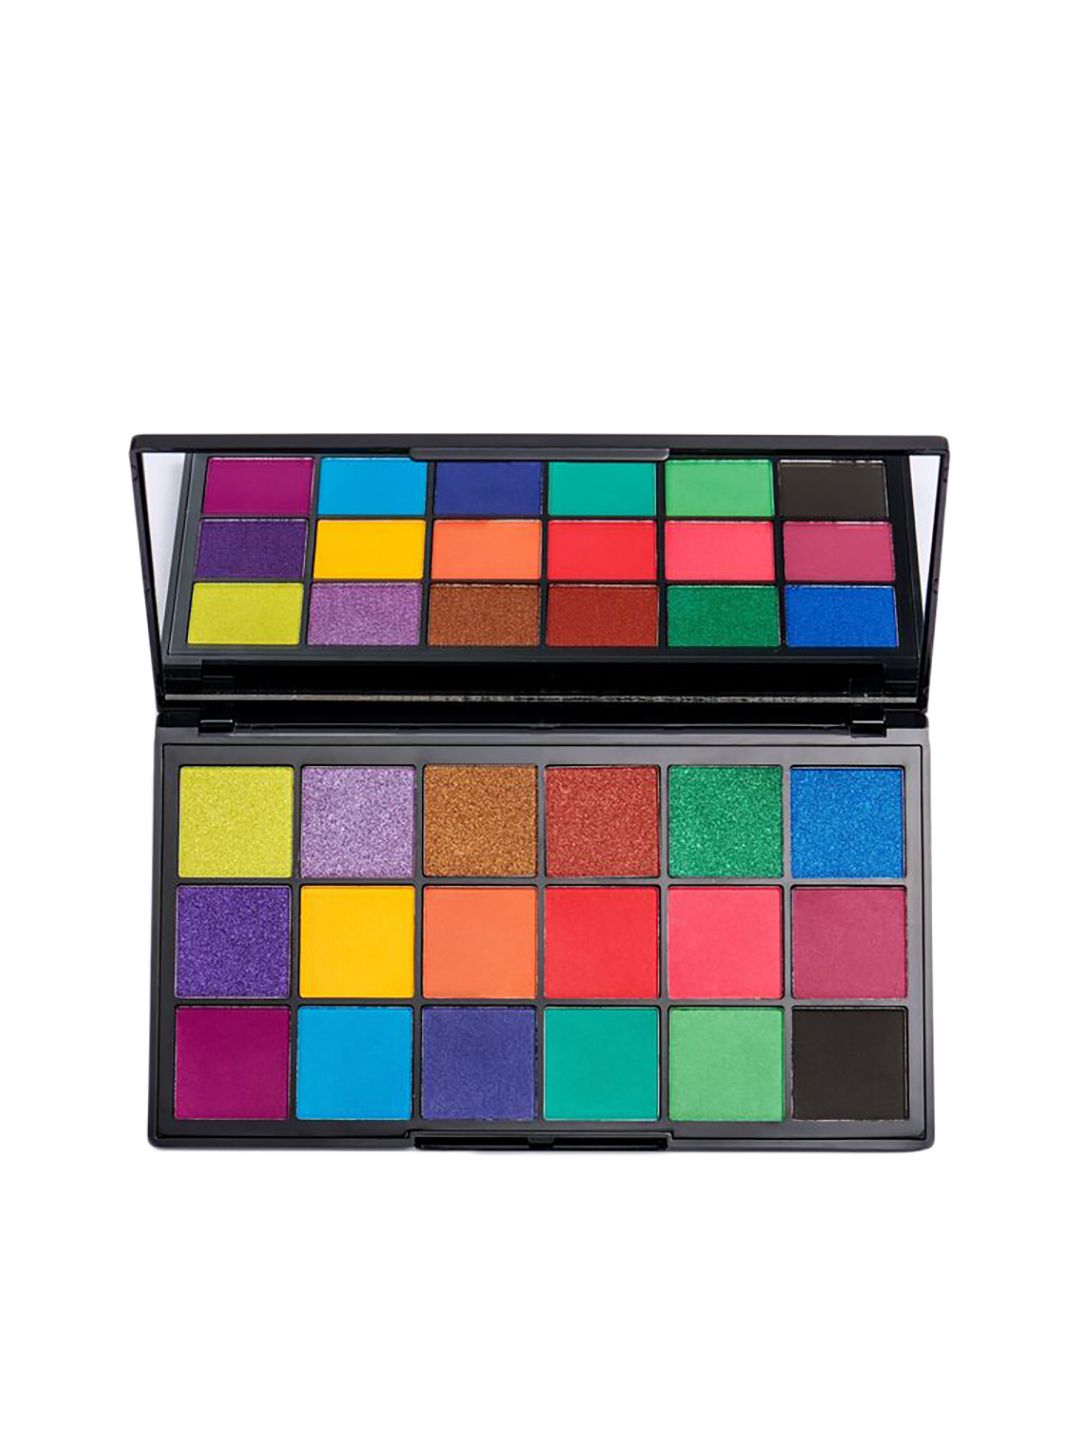 Makeup Revolution London X Tammi Eyeshadow Palette - Tropical Carnival Price in India